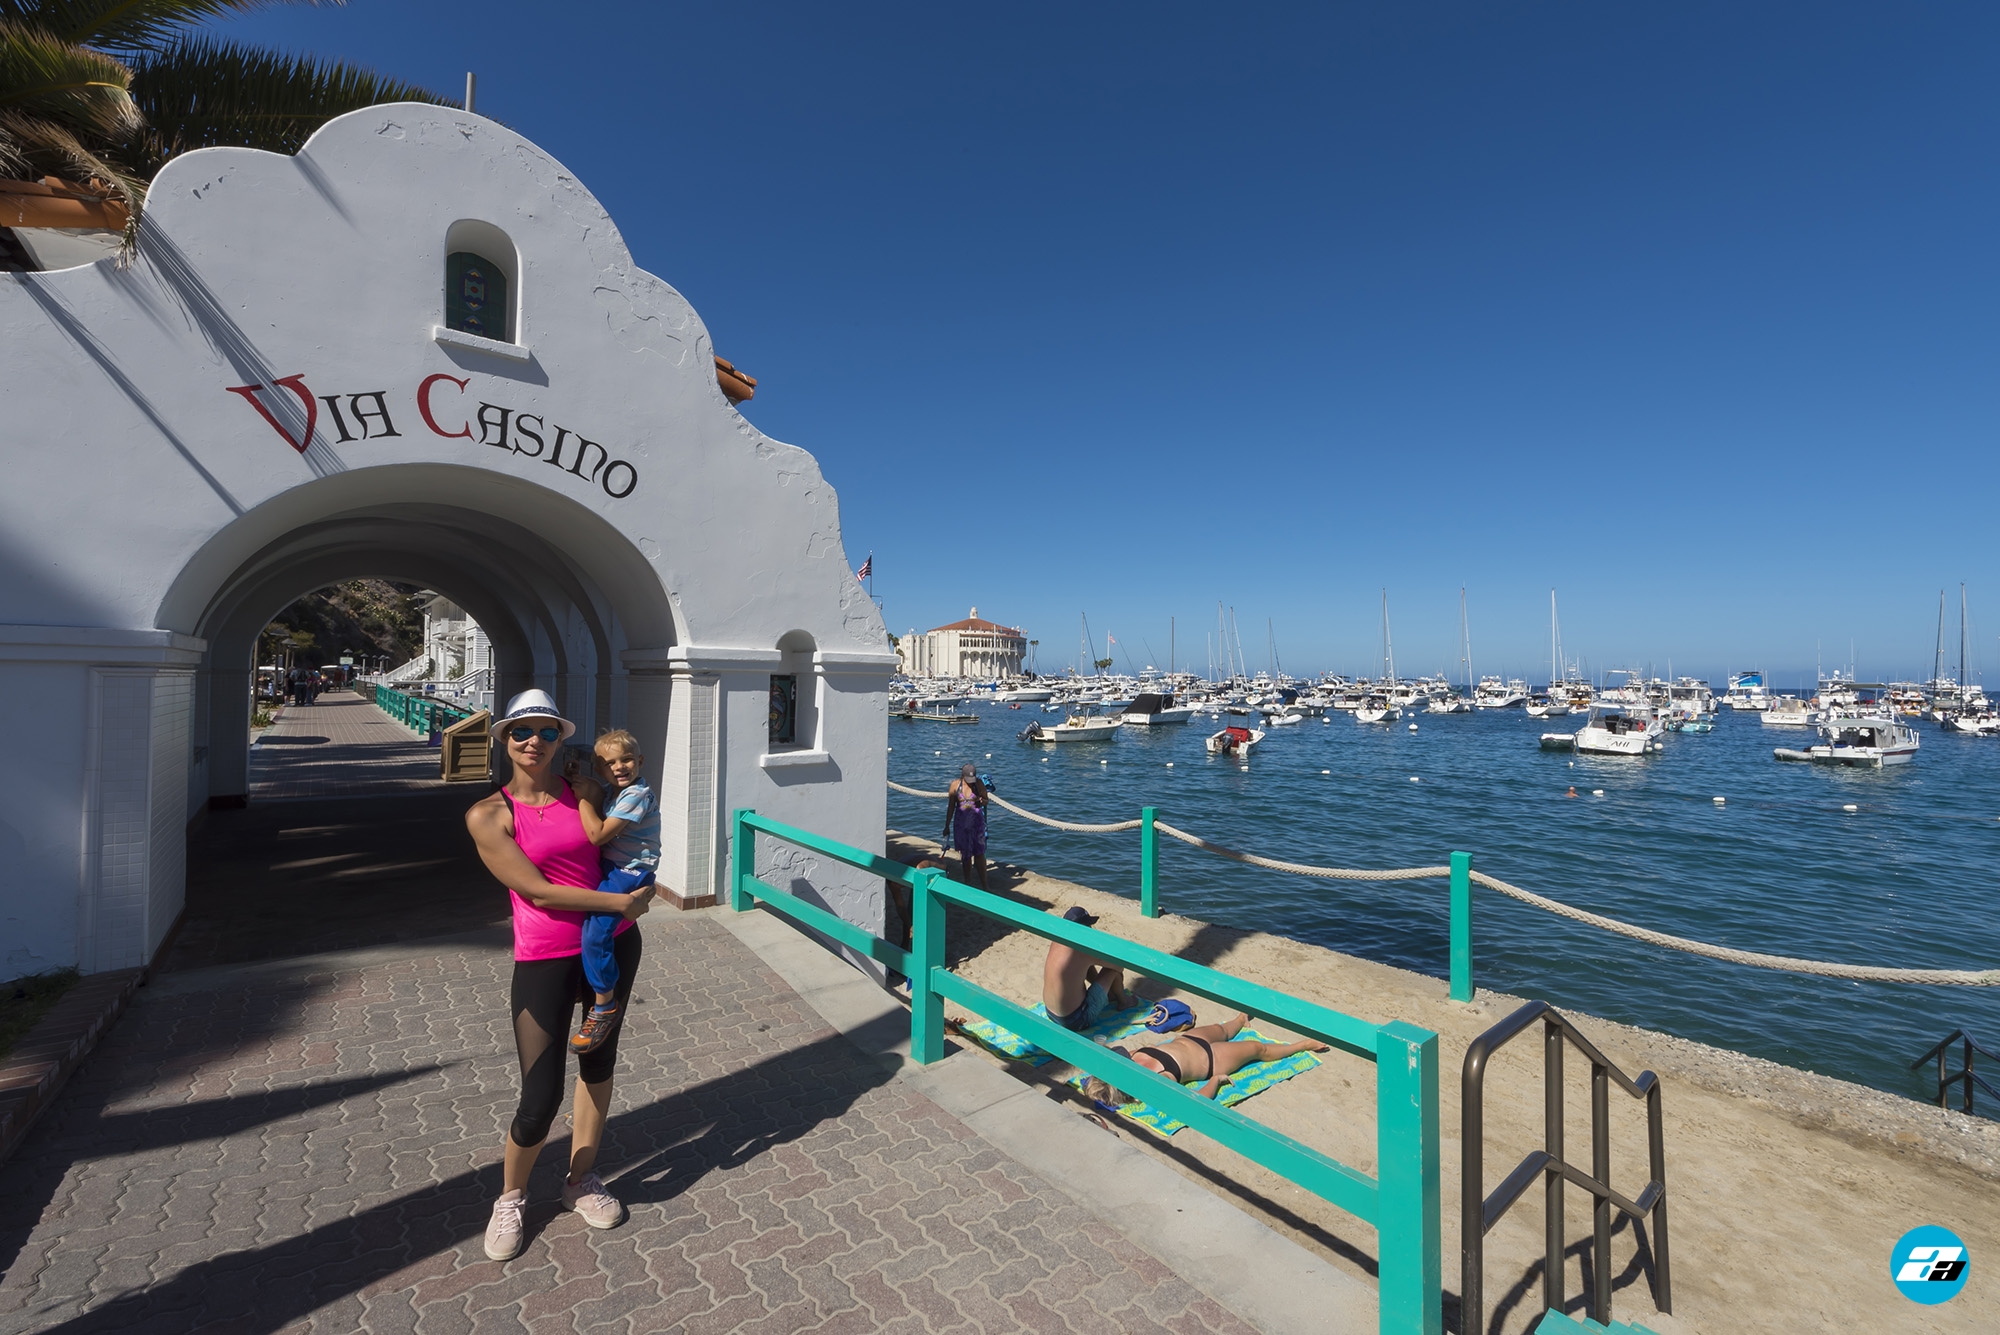 Catalina Island, Chanel Islands National Park, California, Casino View. Pier View. Small Beach. Mother and son. Family.